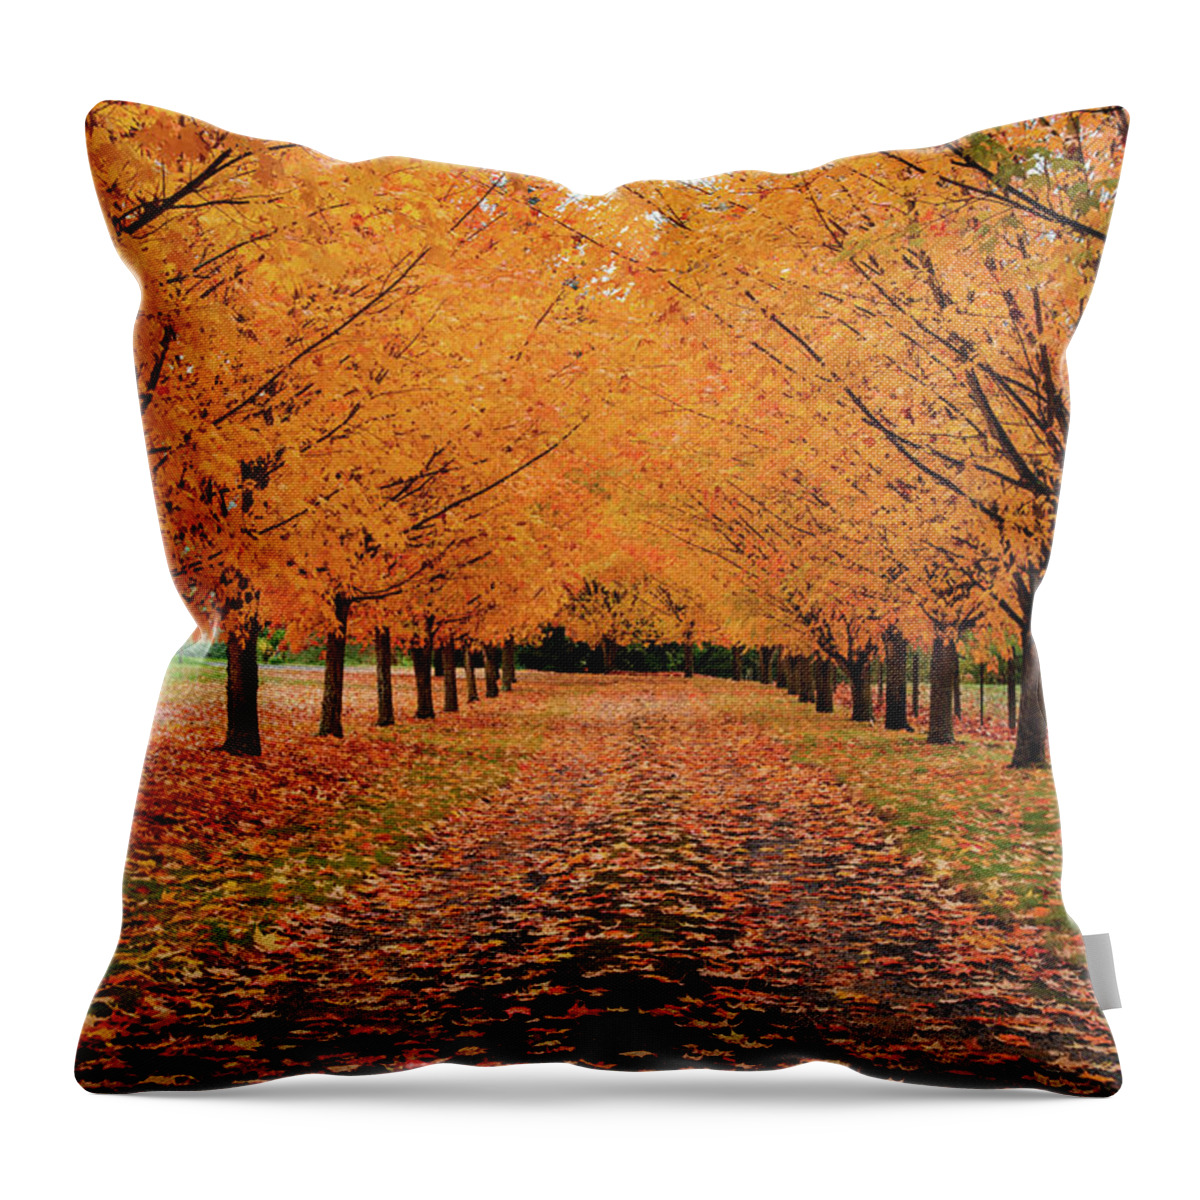 Scenics Throw Pillow featuring the photograph Fall Driveway by Piriya Photography